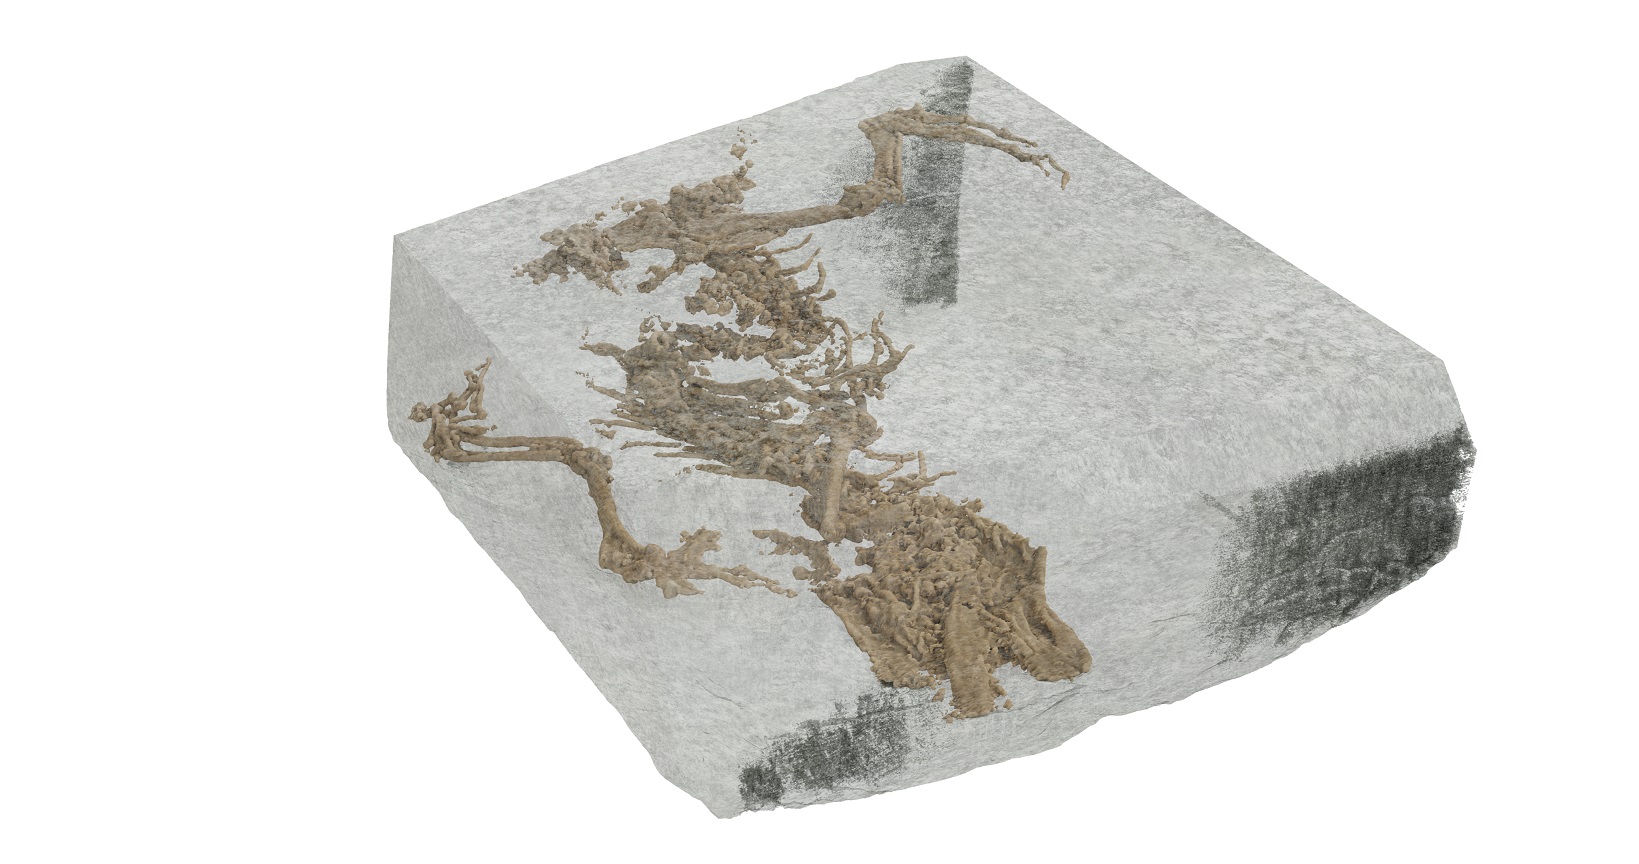 Digital image of the fossil of Bellairsia gracilis inside the rock